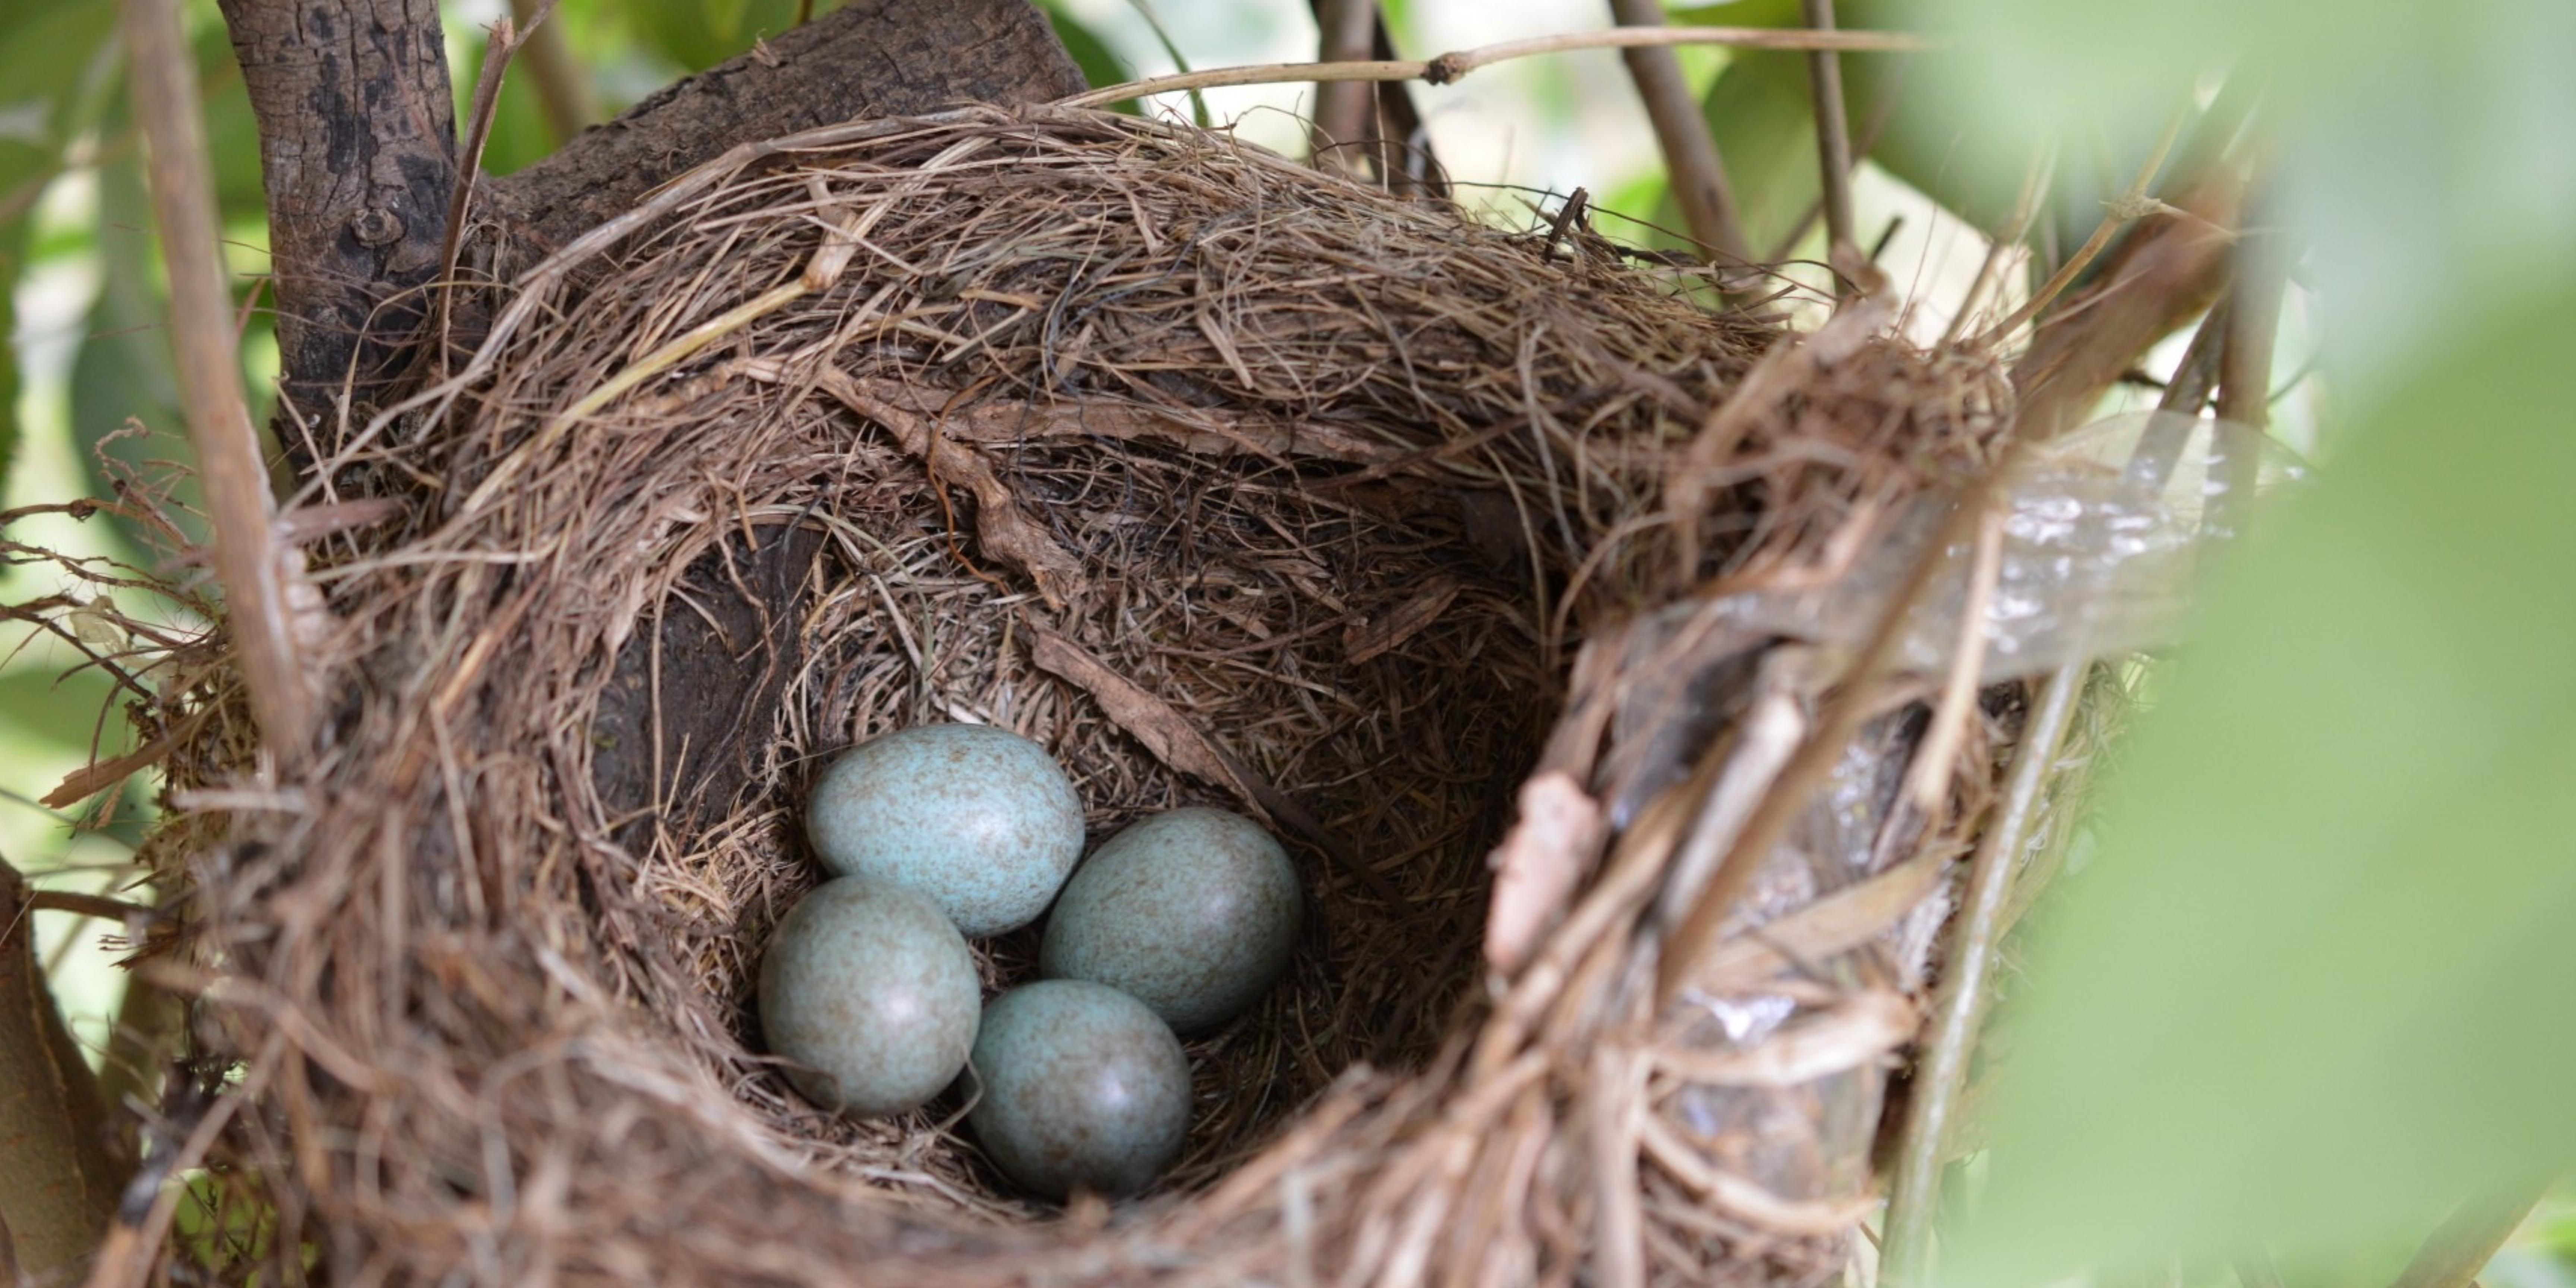 'Cuckooing' is named after the Cuckoo bird, which places its eggs in another bird's nest for the other birds to unknowingly raise.